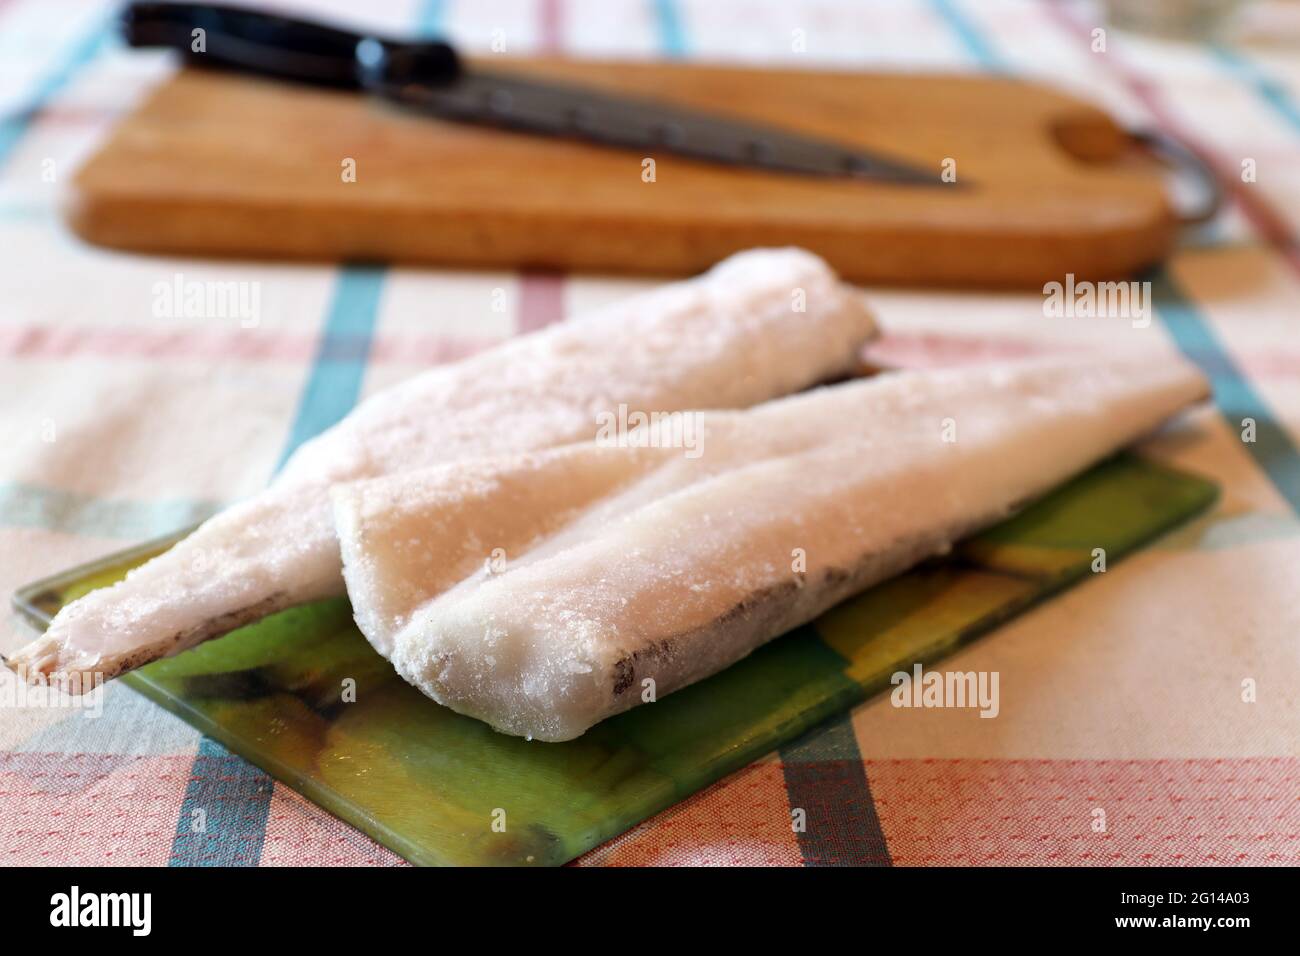 Several slices of frozen fish on glass cutting board Stock Photo